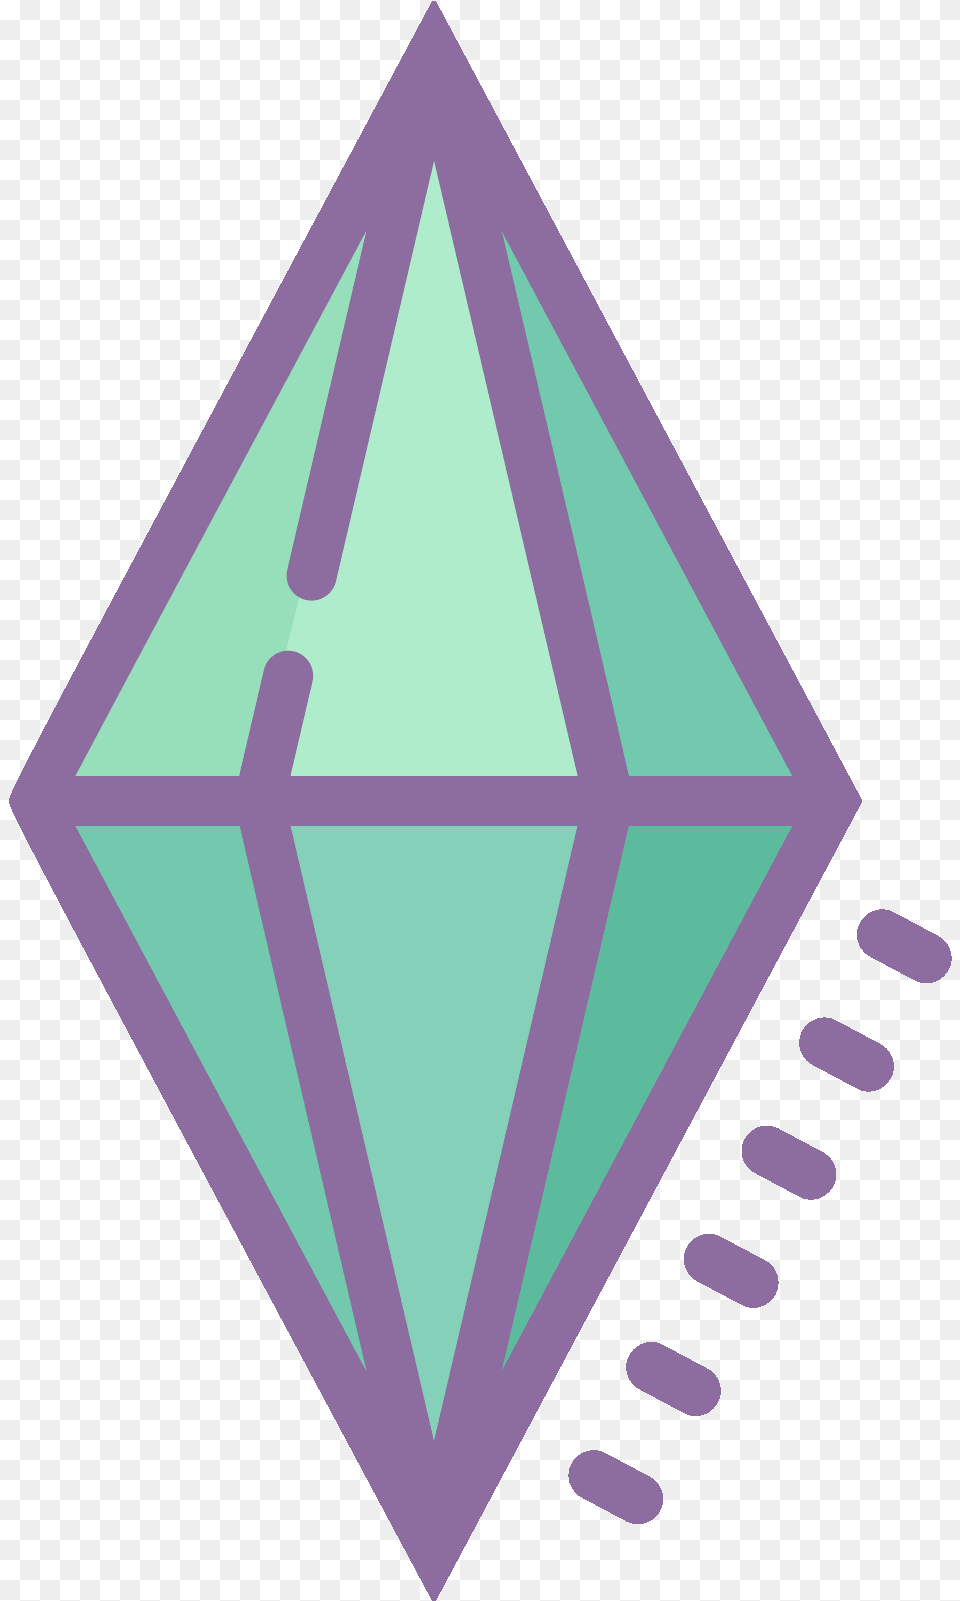 The Sims Icon Triangle Png